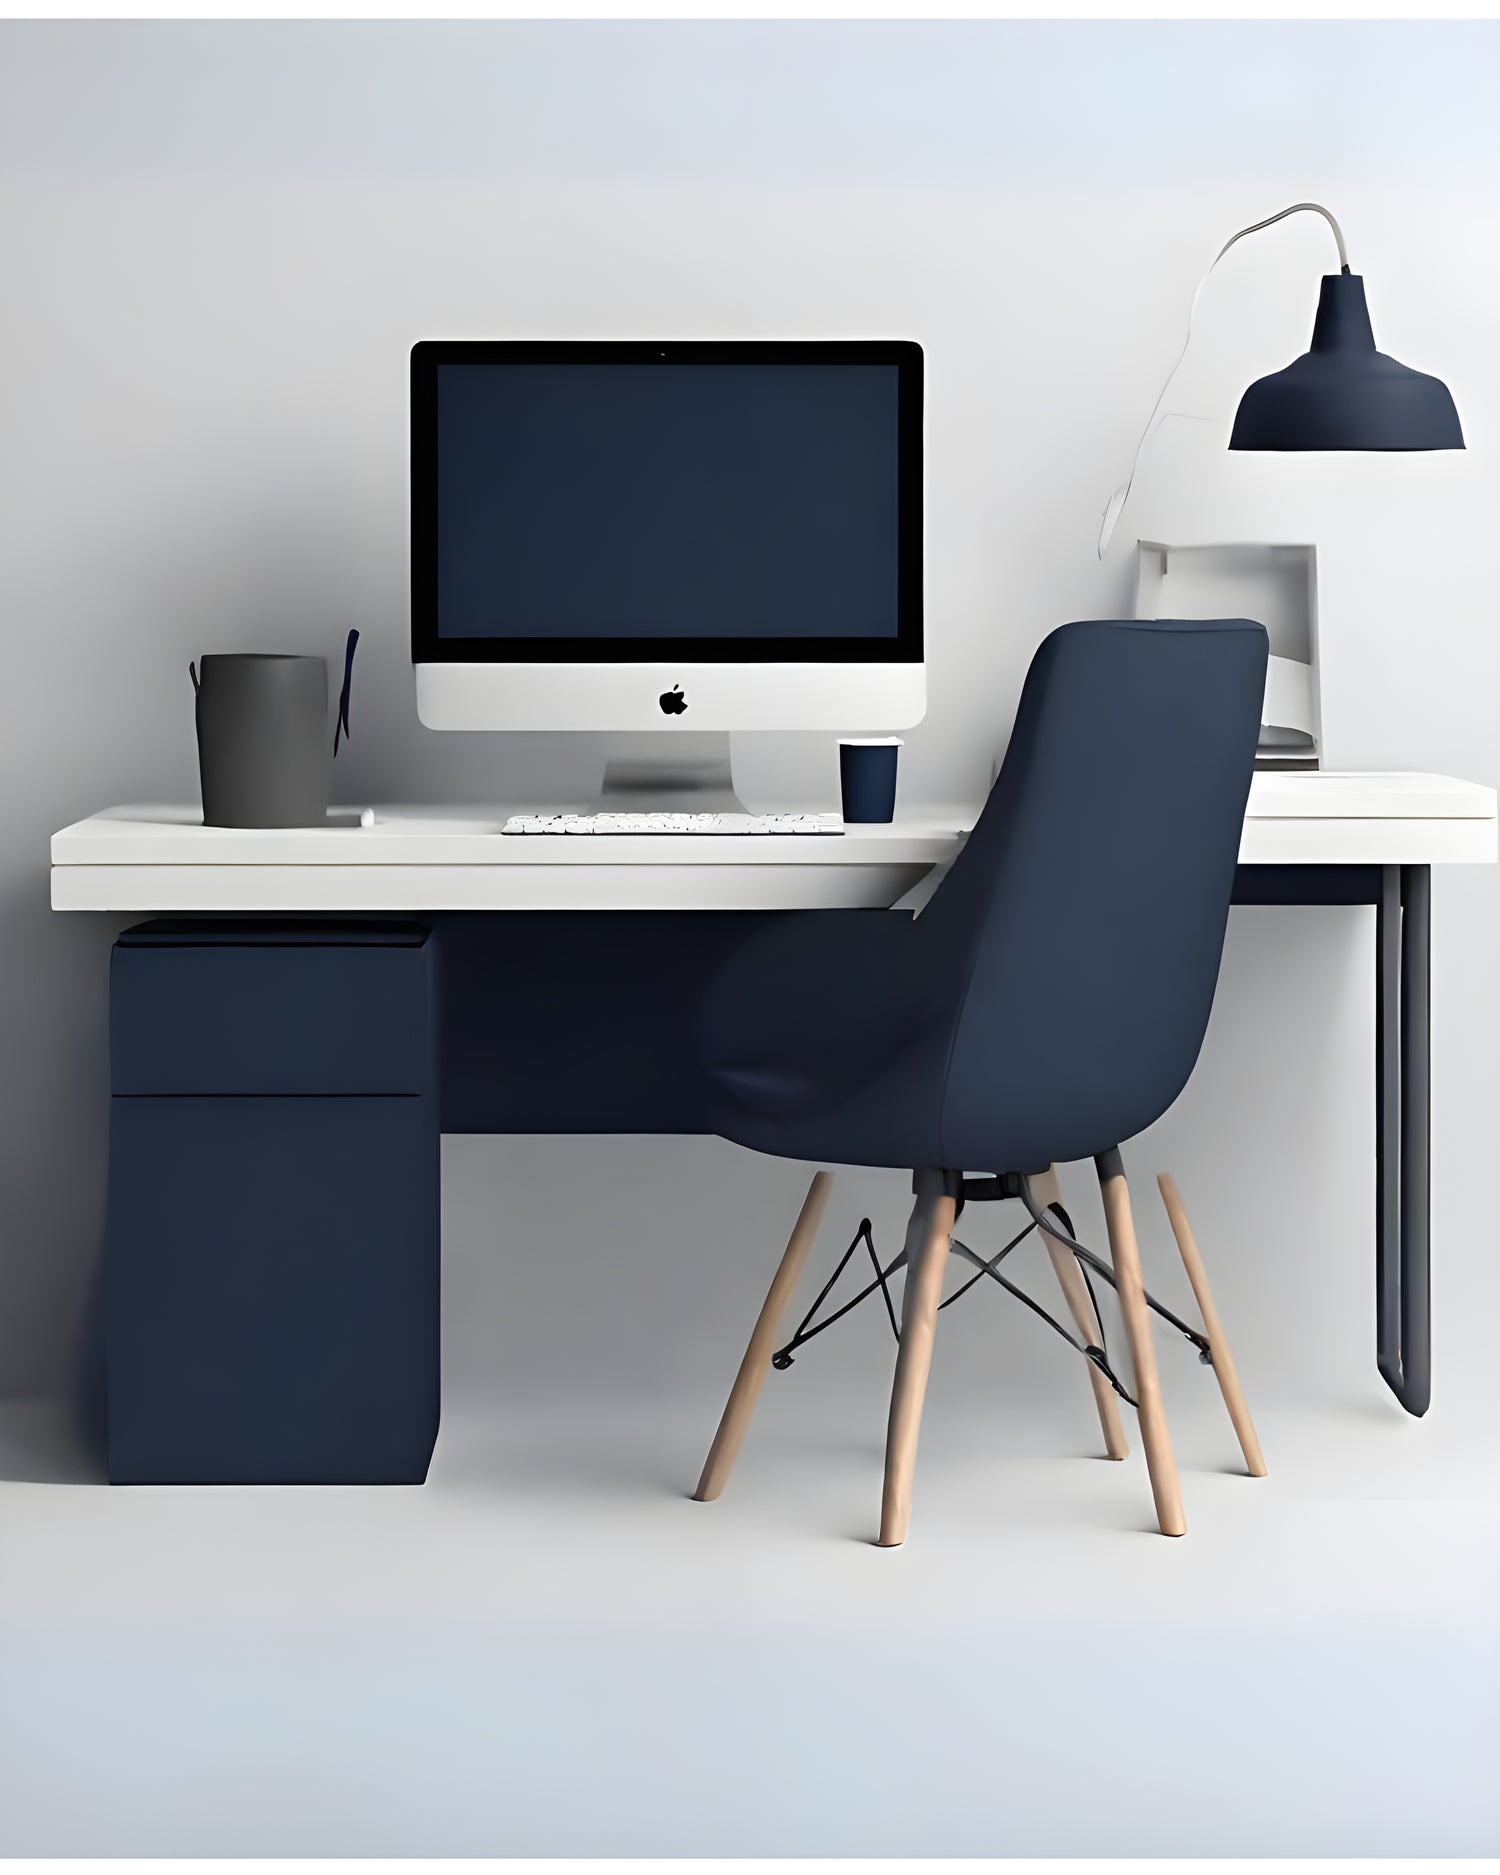 A minimalist Clevisco workspace featuring ergonomic accessories, with a sleek white desk supporting an Apple computer, complemented by a stylish dark blue ergonomic chair and designer lamp, exuding modern efficiency and comfort.